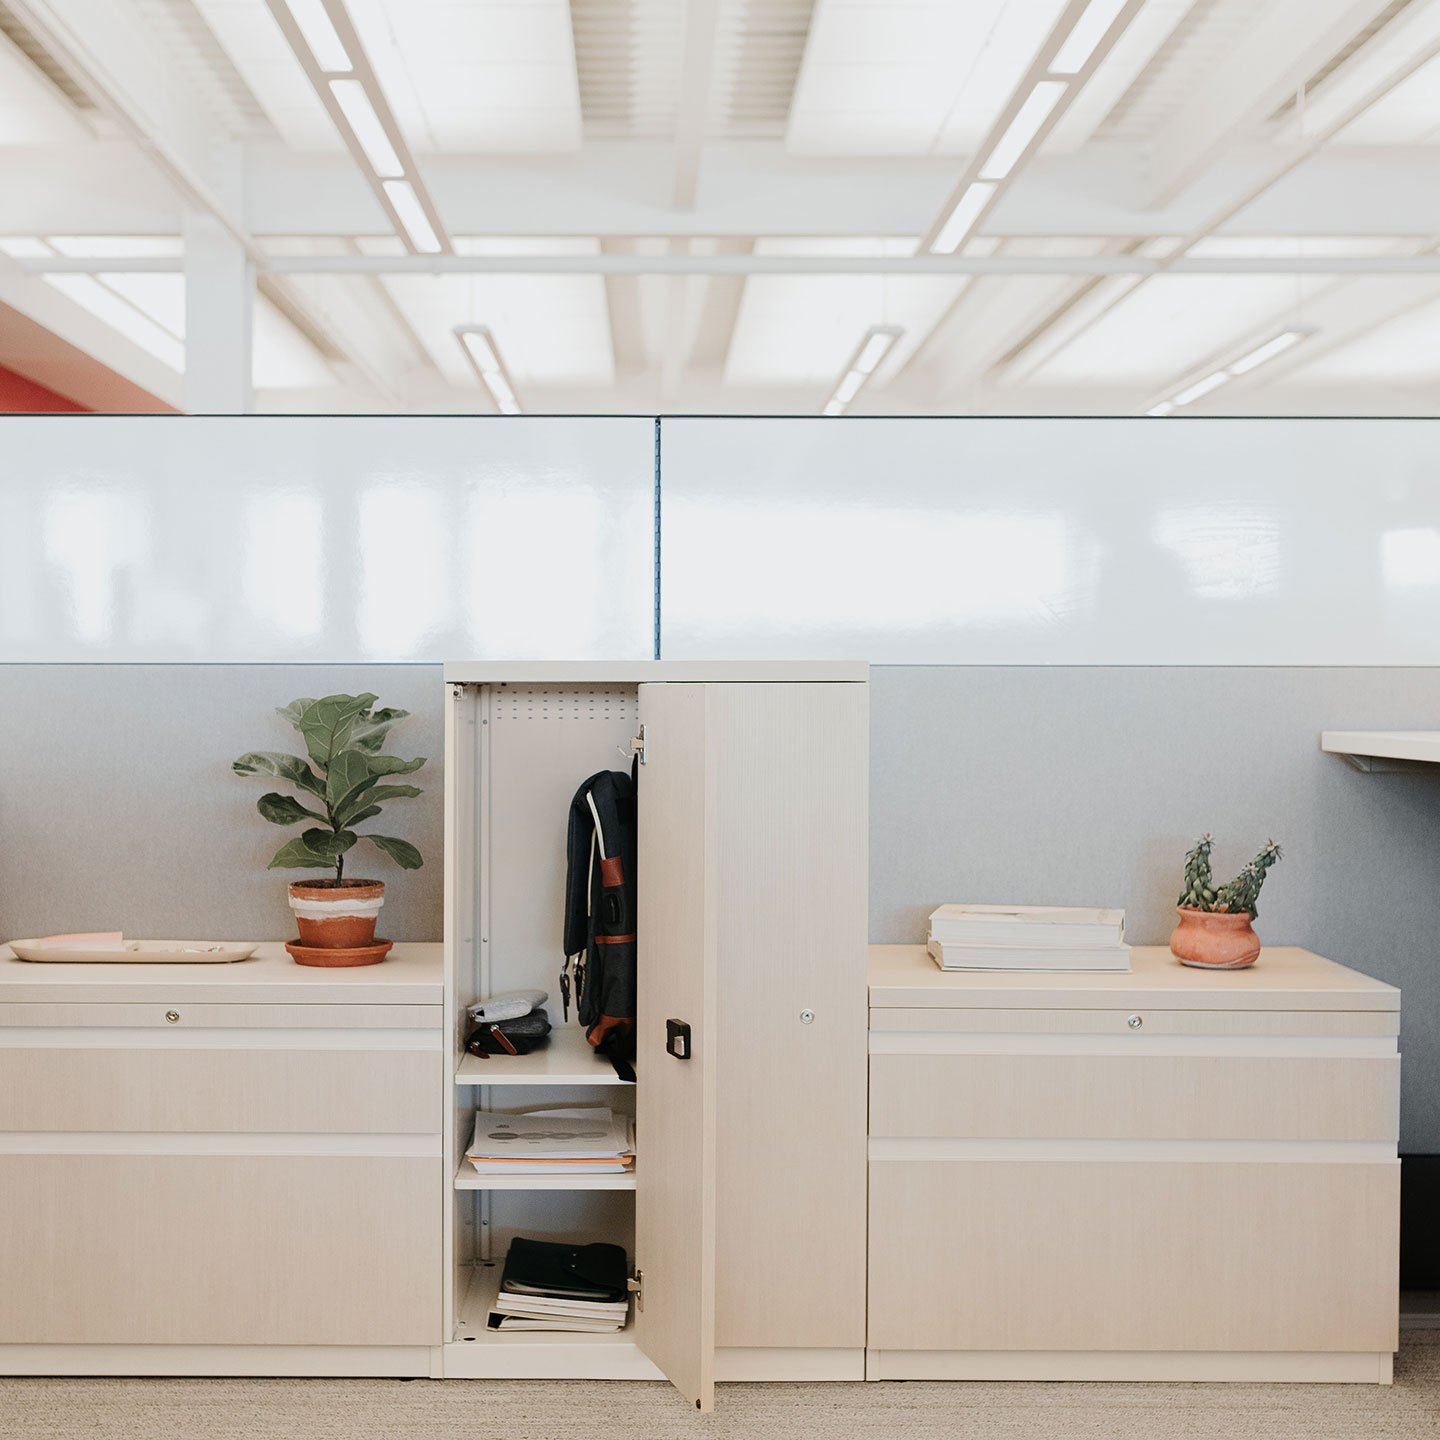 Haworth Compose Workspace with file cabinets and tall cabinet for storage